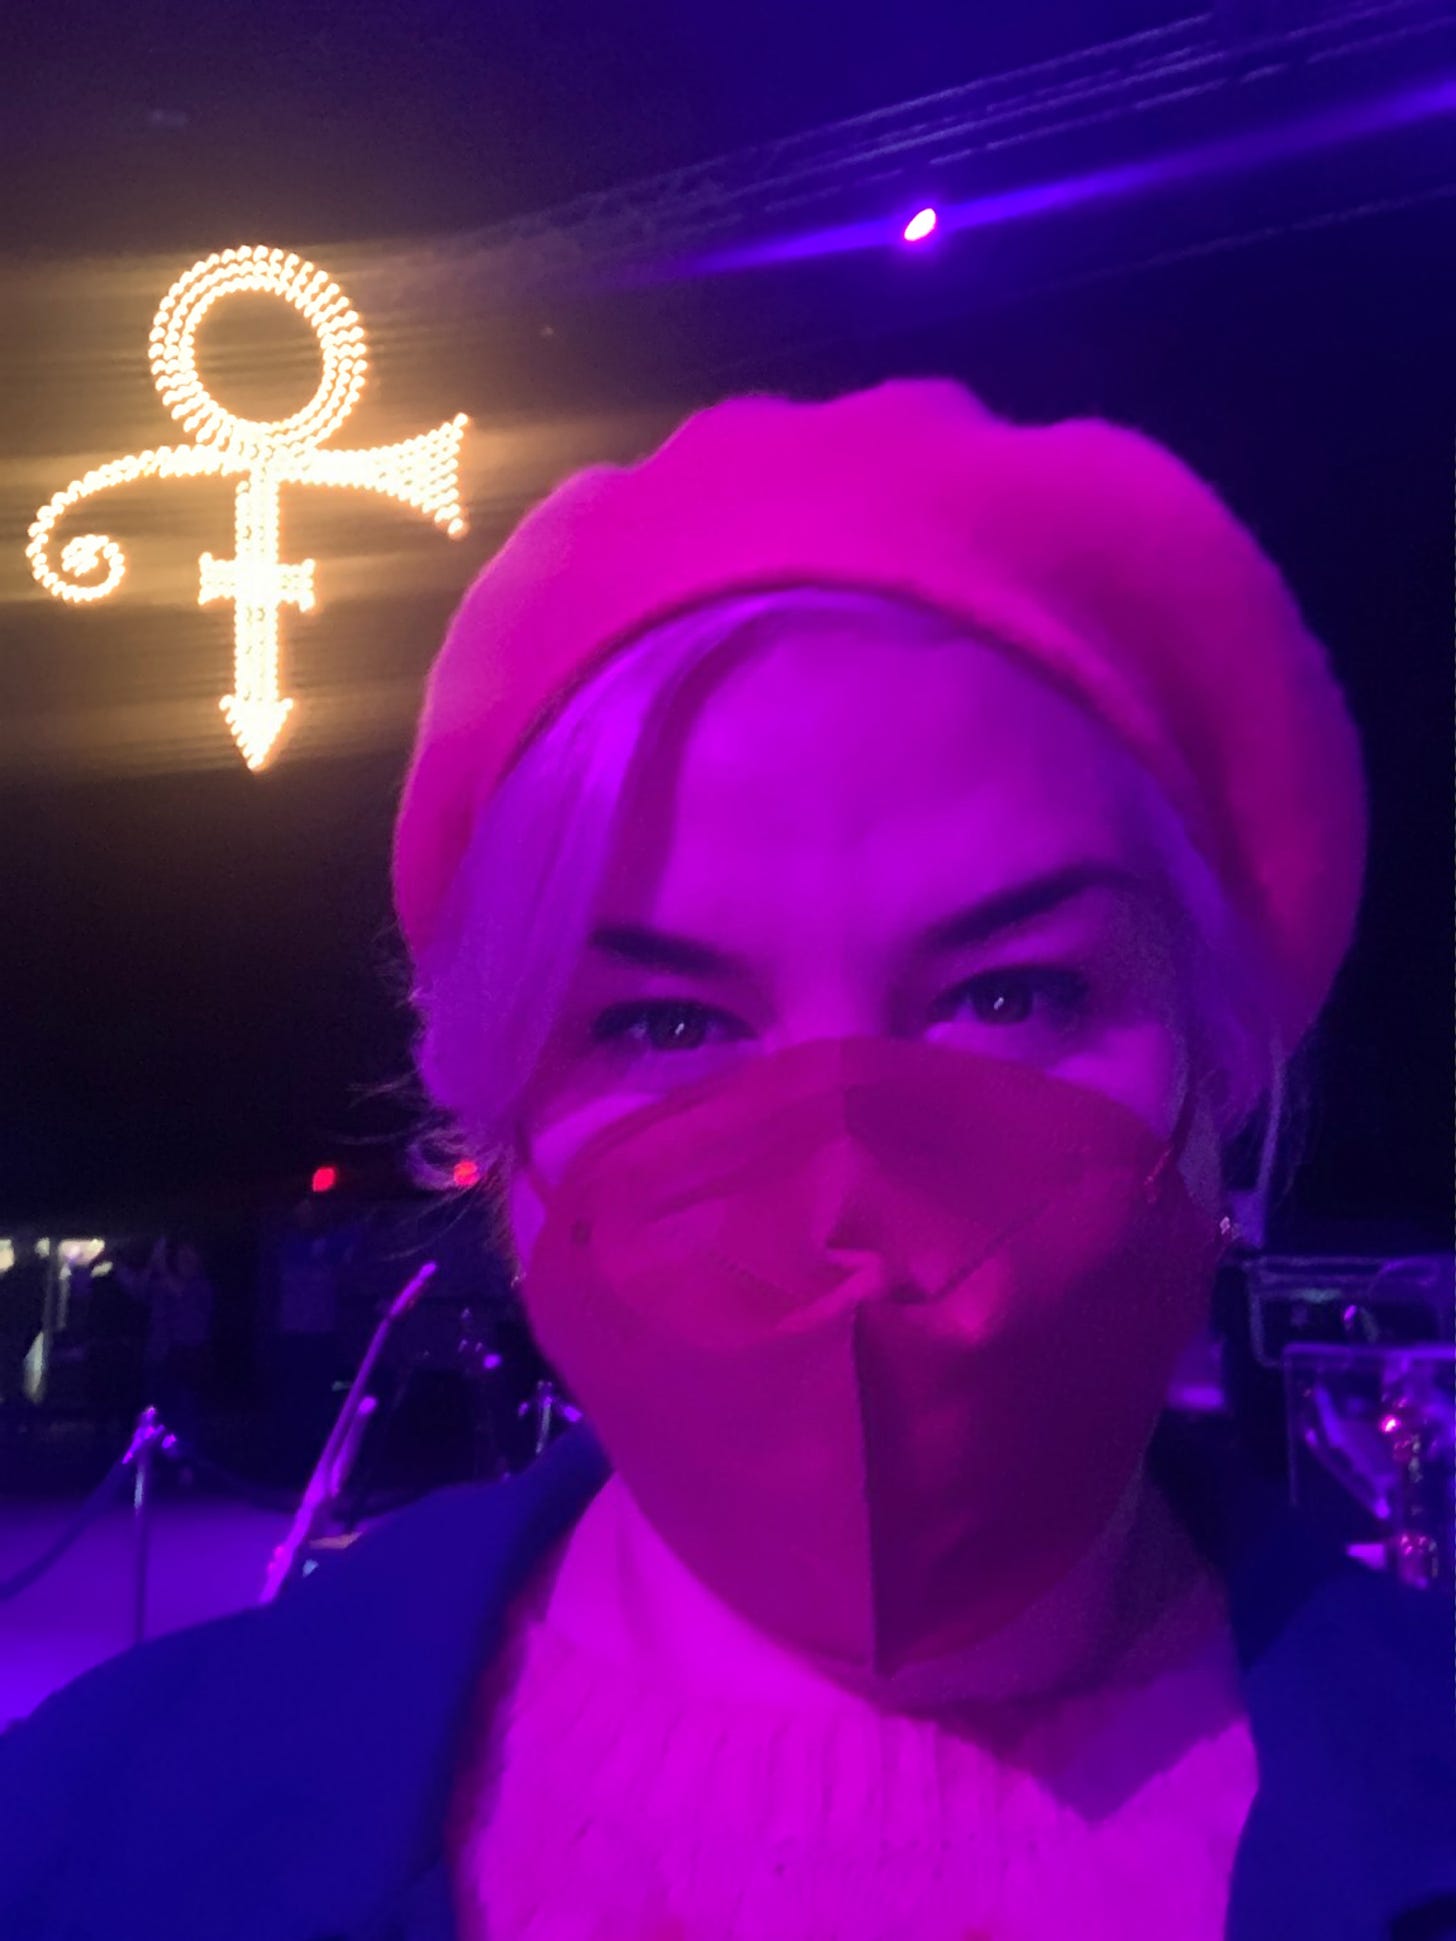 Caissie in a beret and face mask stands on a darkened soundstage at Paisley Park in front of an illuminated Love Symbol, Prince's signature.